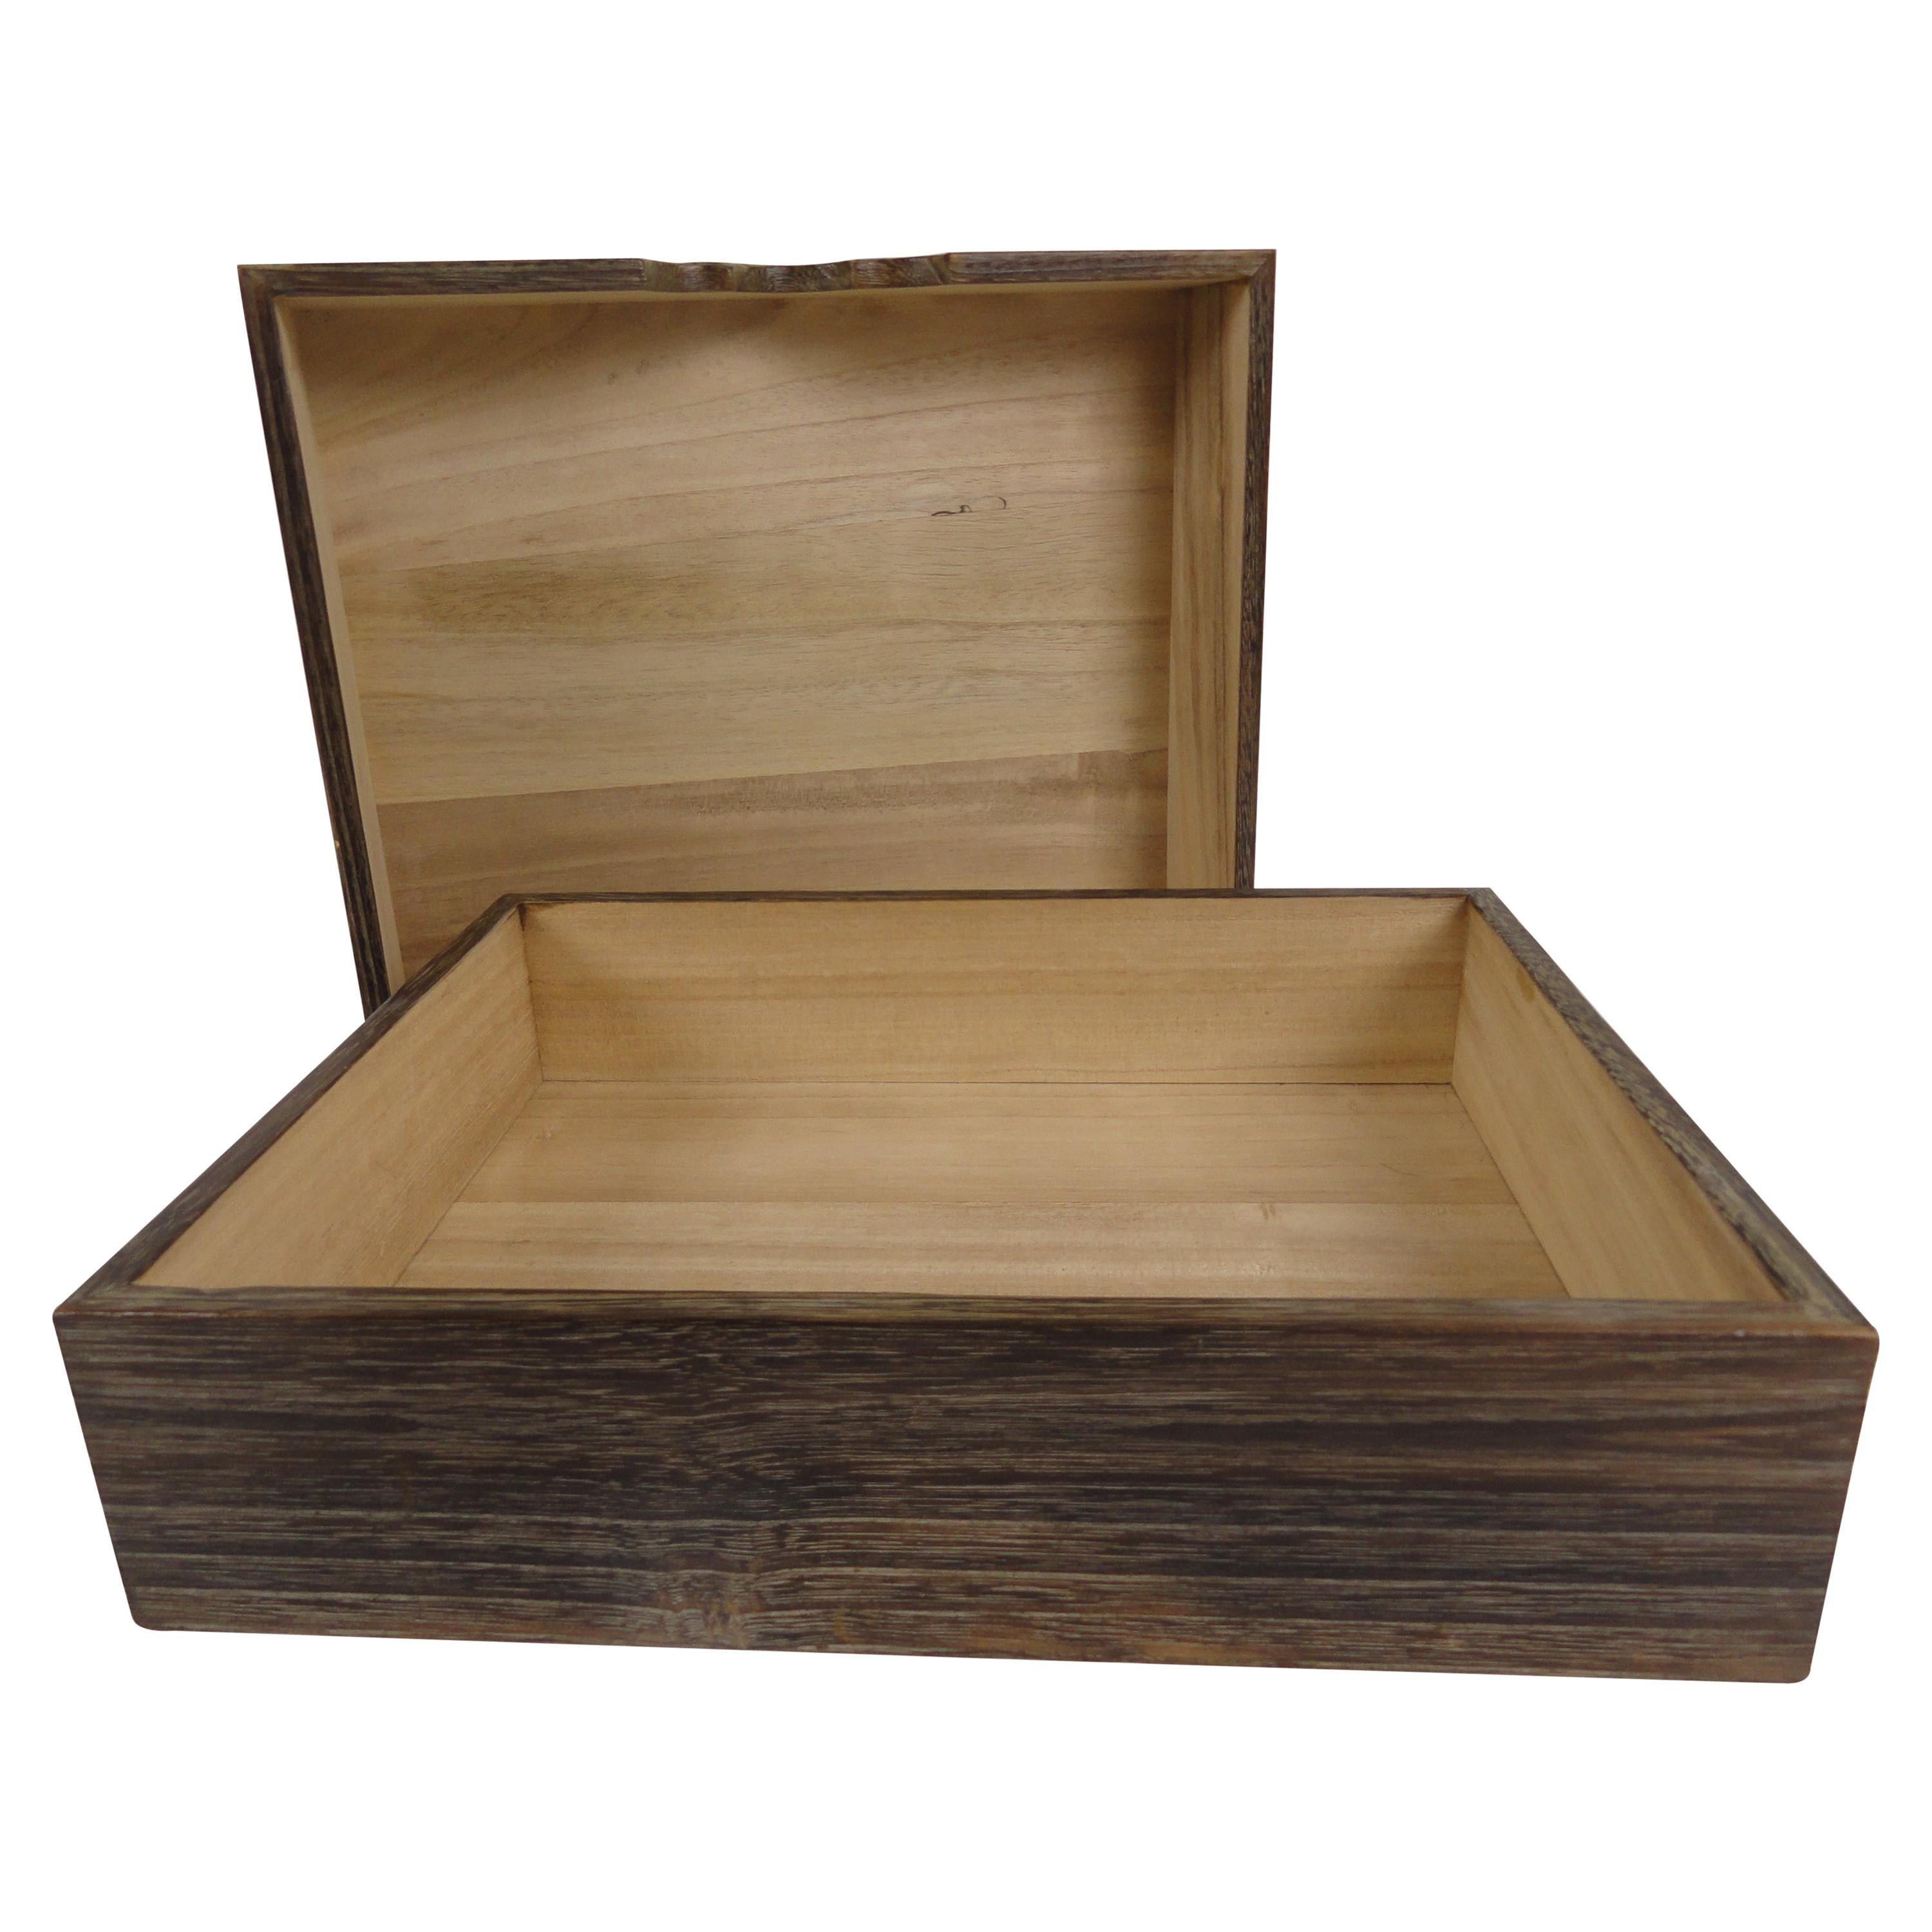 Japanese Wood Box For Sale